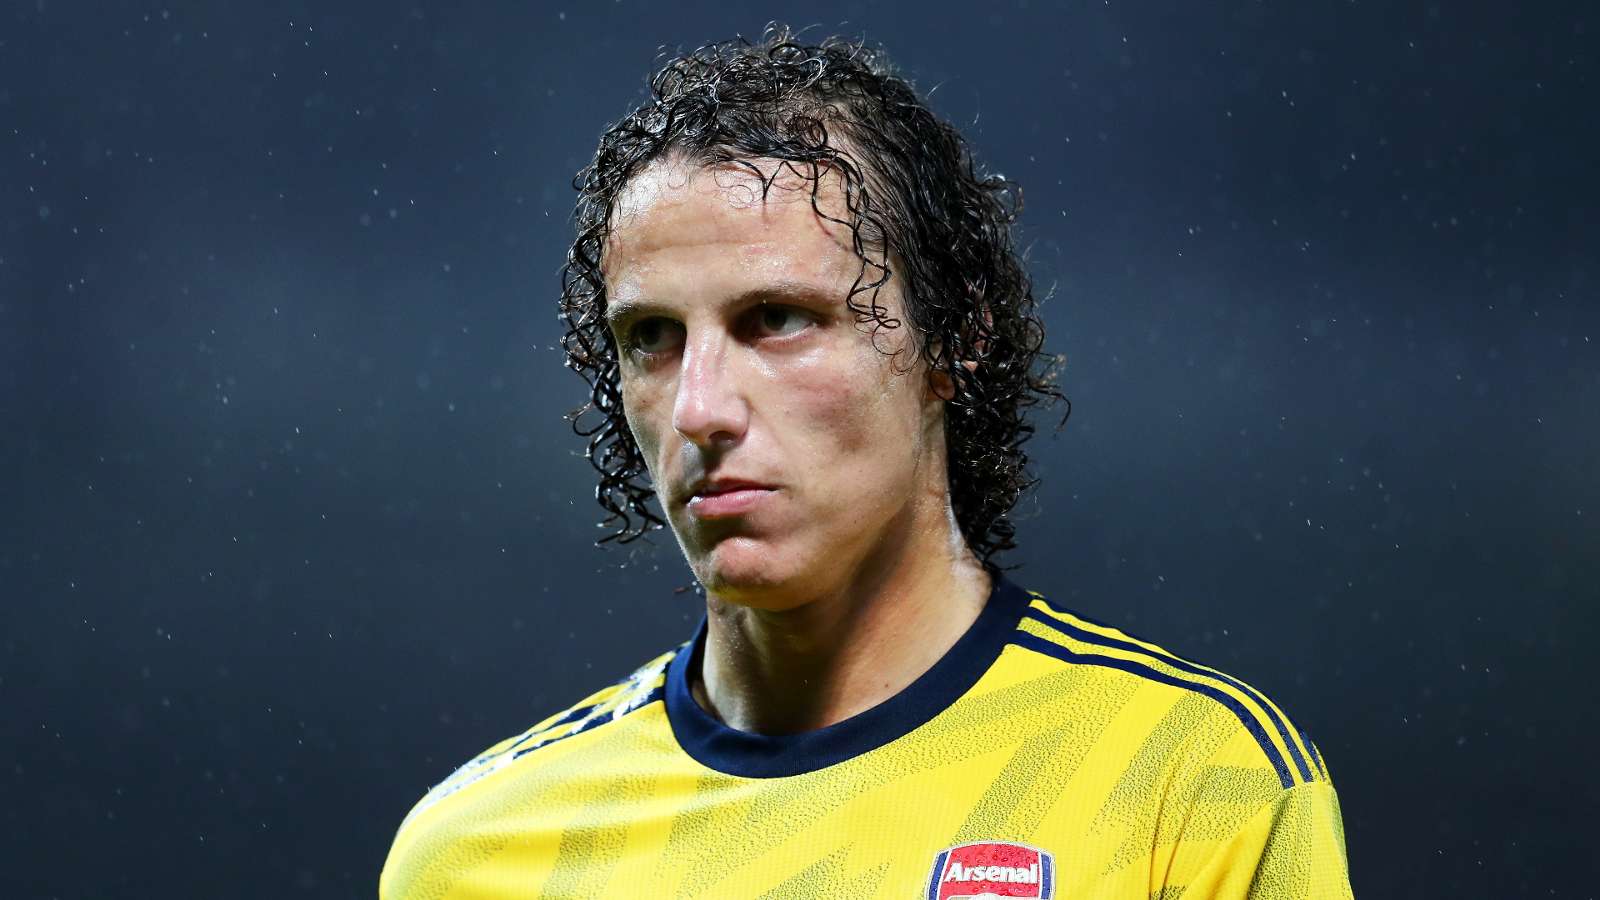 'They've taken our poorest defender' - Chelsea couldn't believe Arsenal wanted Luiz, says Cascarino - Bóng Đá